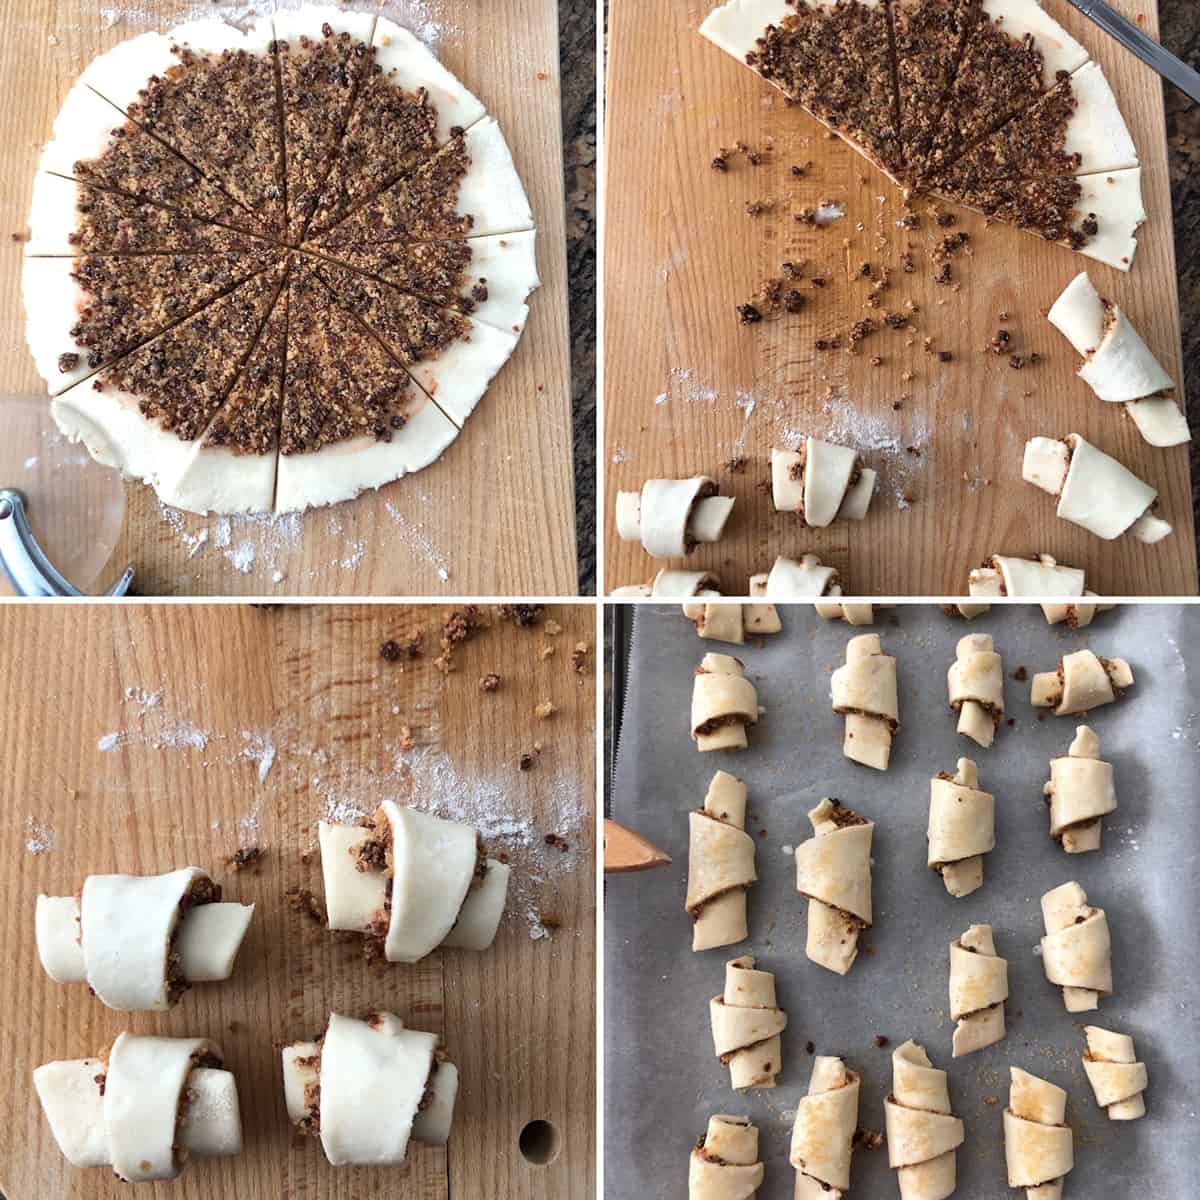 Step by step photos showing the shaping of rugelach